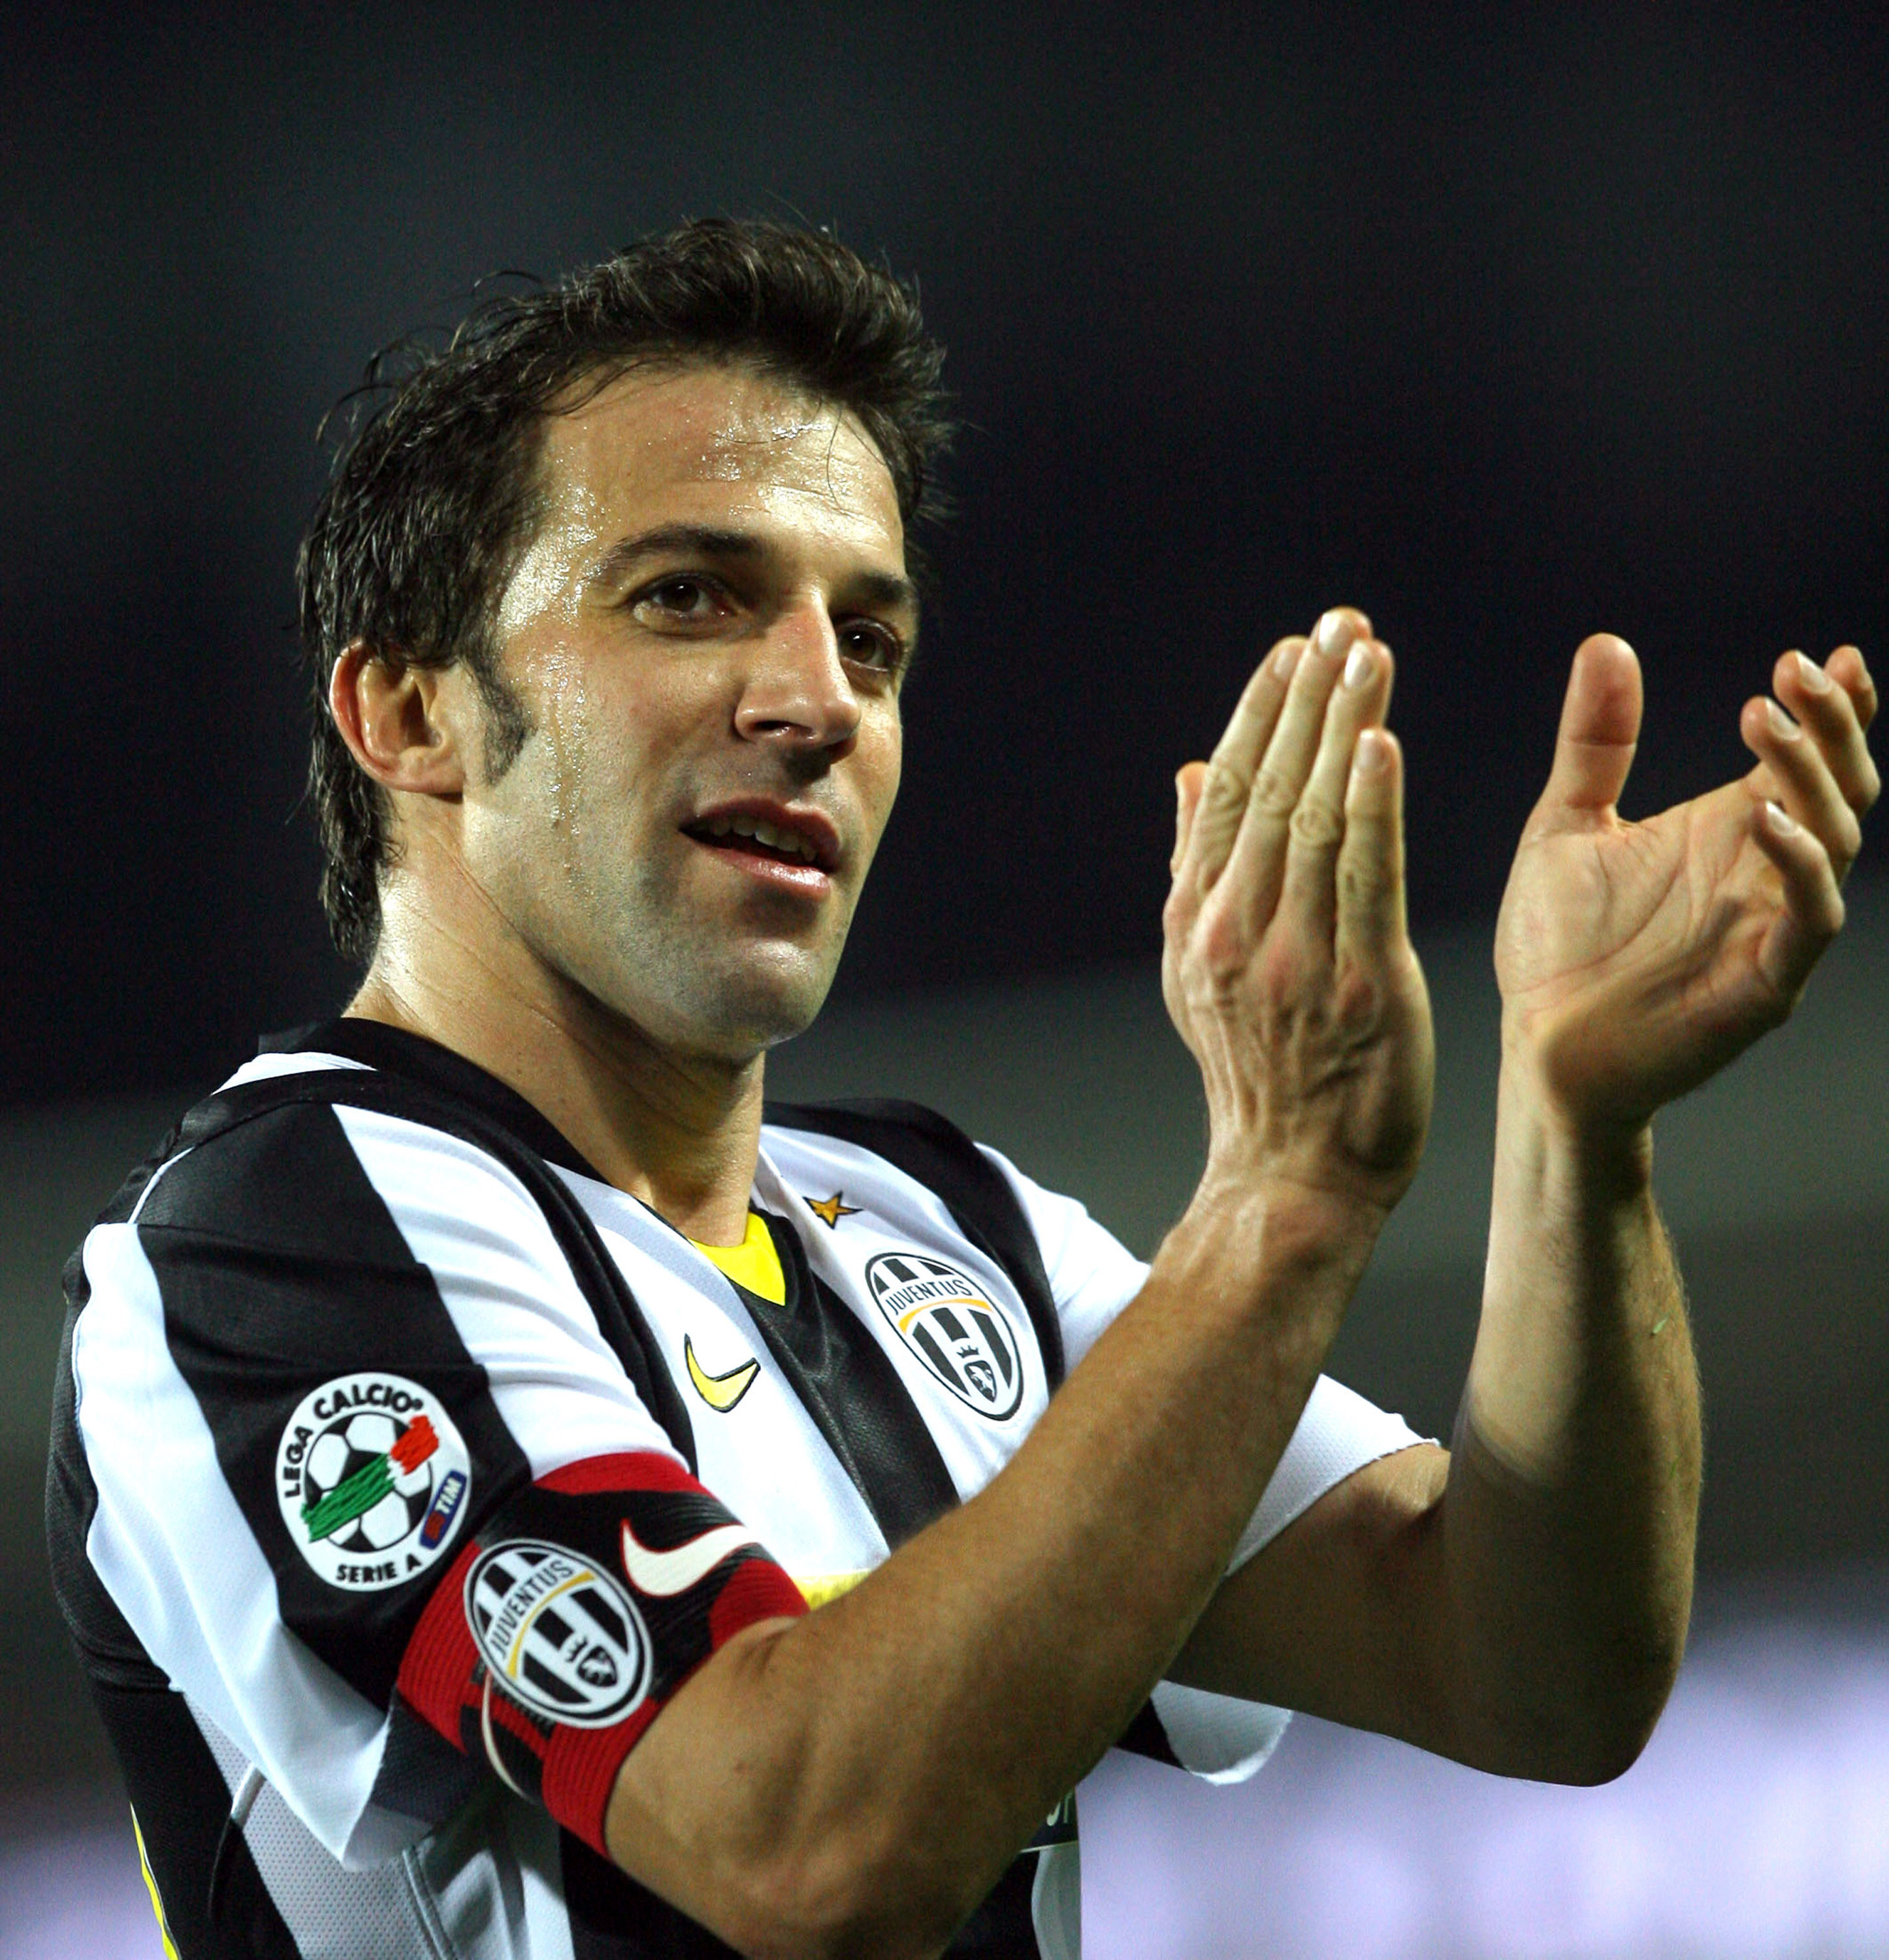 Sydney Alessandro Del Piero wallpapers and images - wallpapers, pictures,  photos